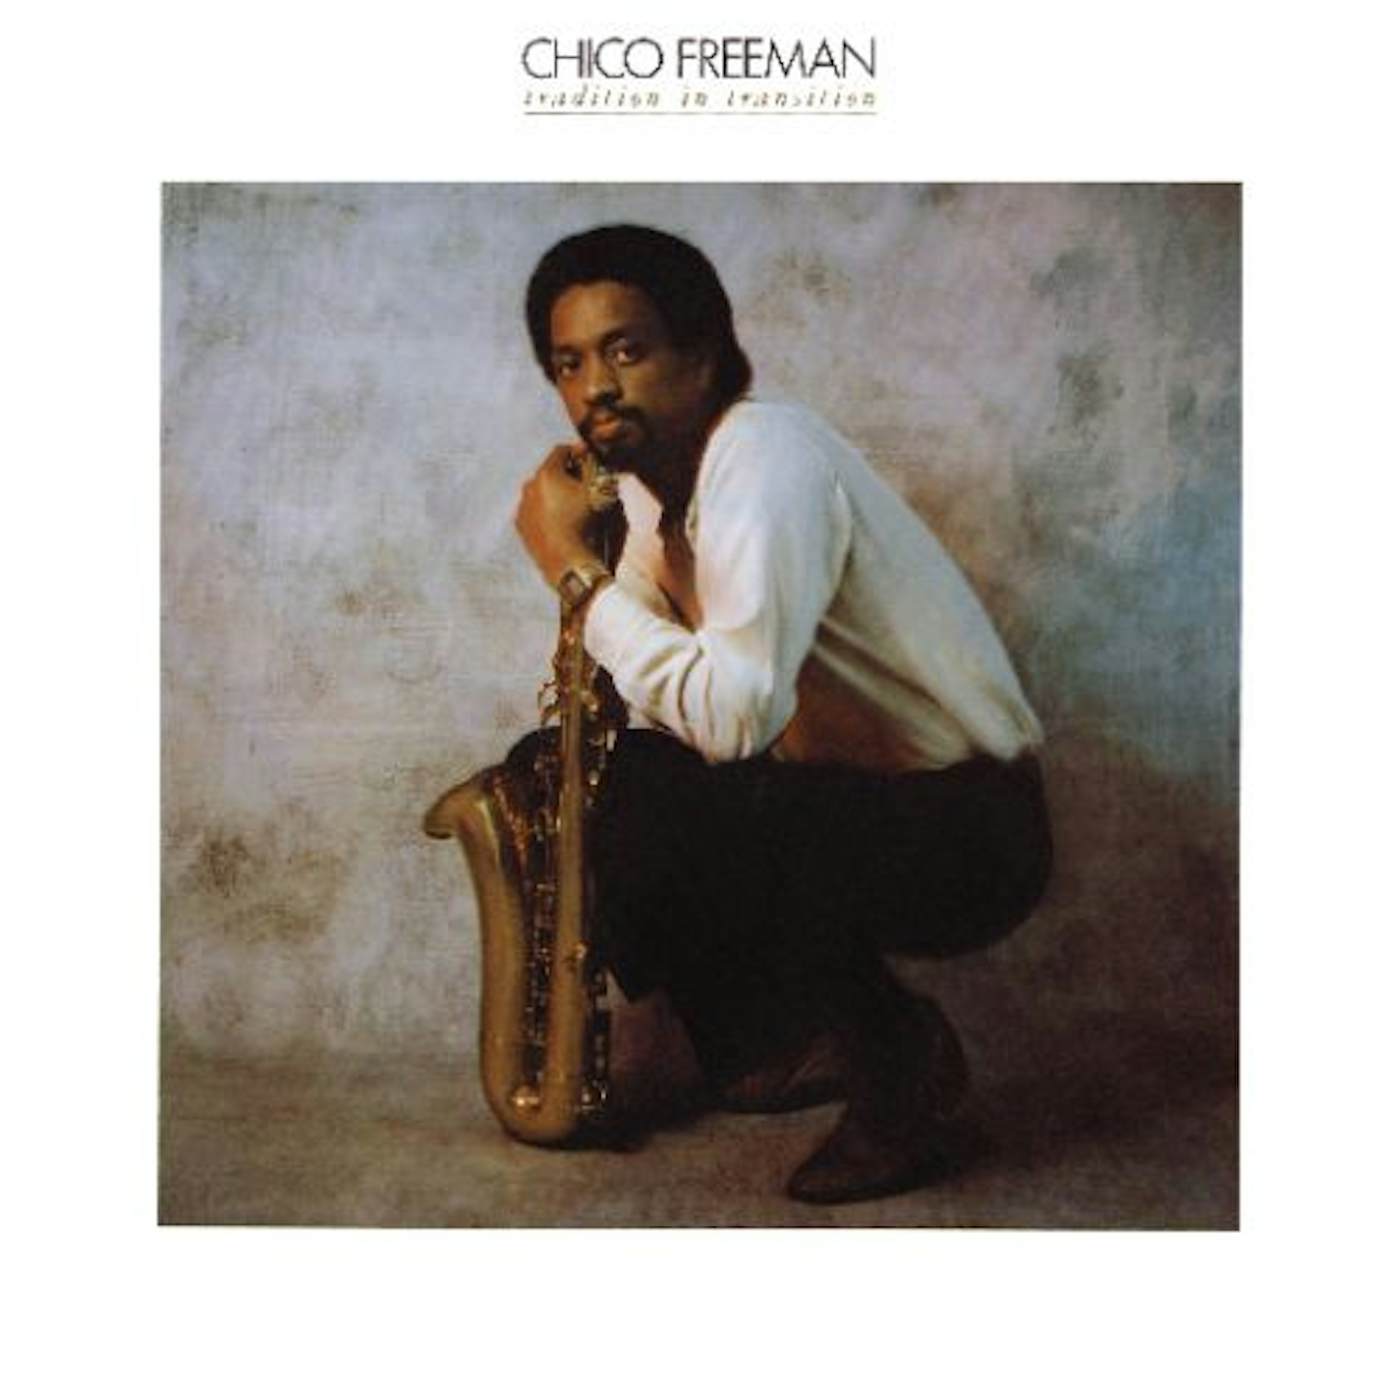 Chico Freeman TRADITION IN TRANSITION CD